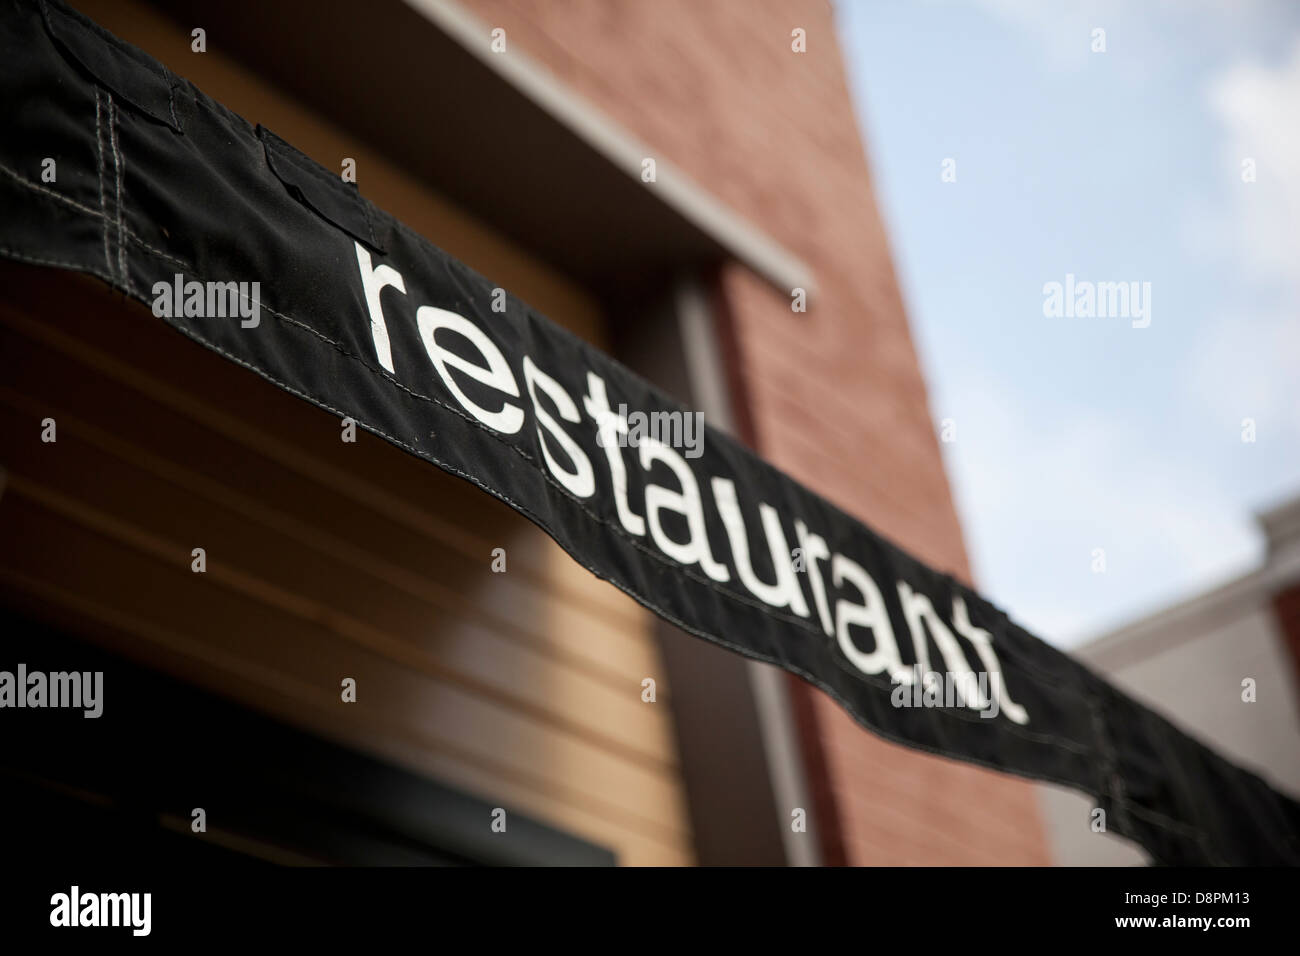 Exterior awning on a building that says restaurant. Stock Photo